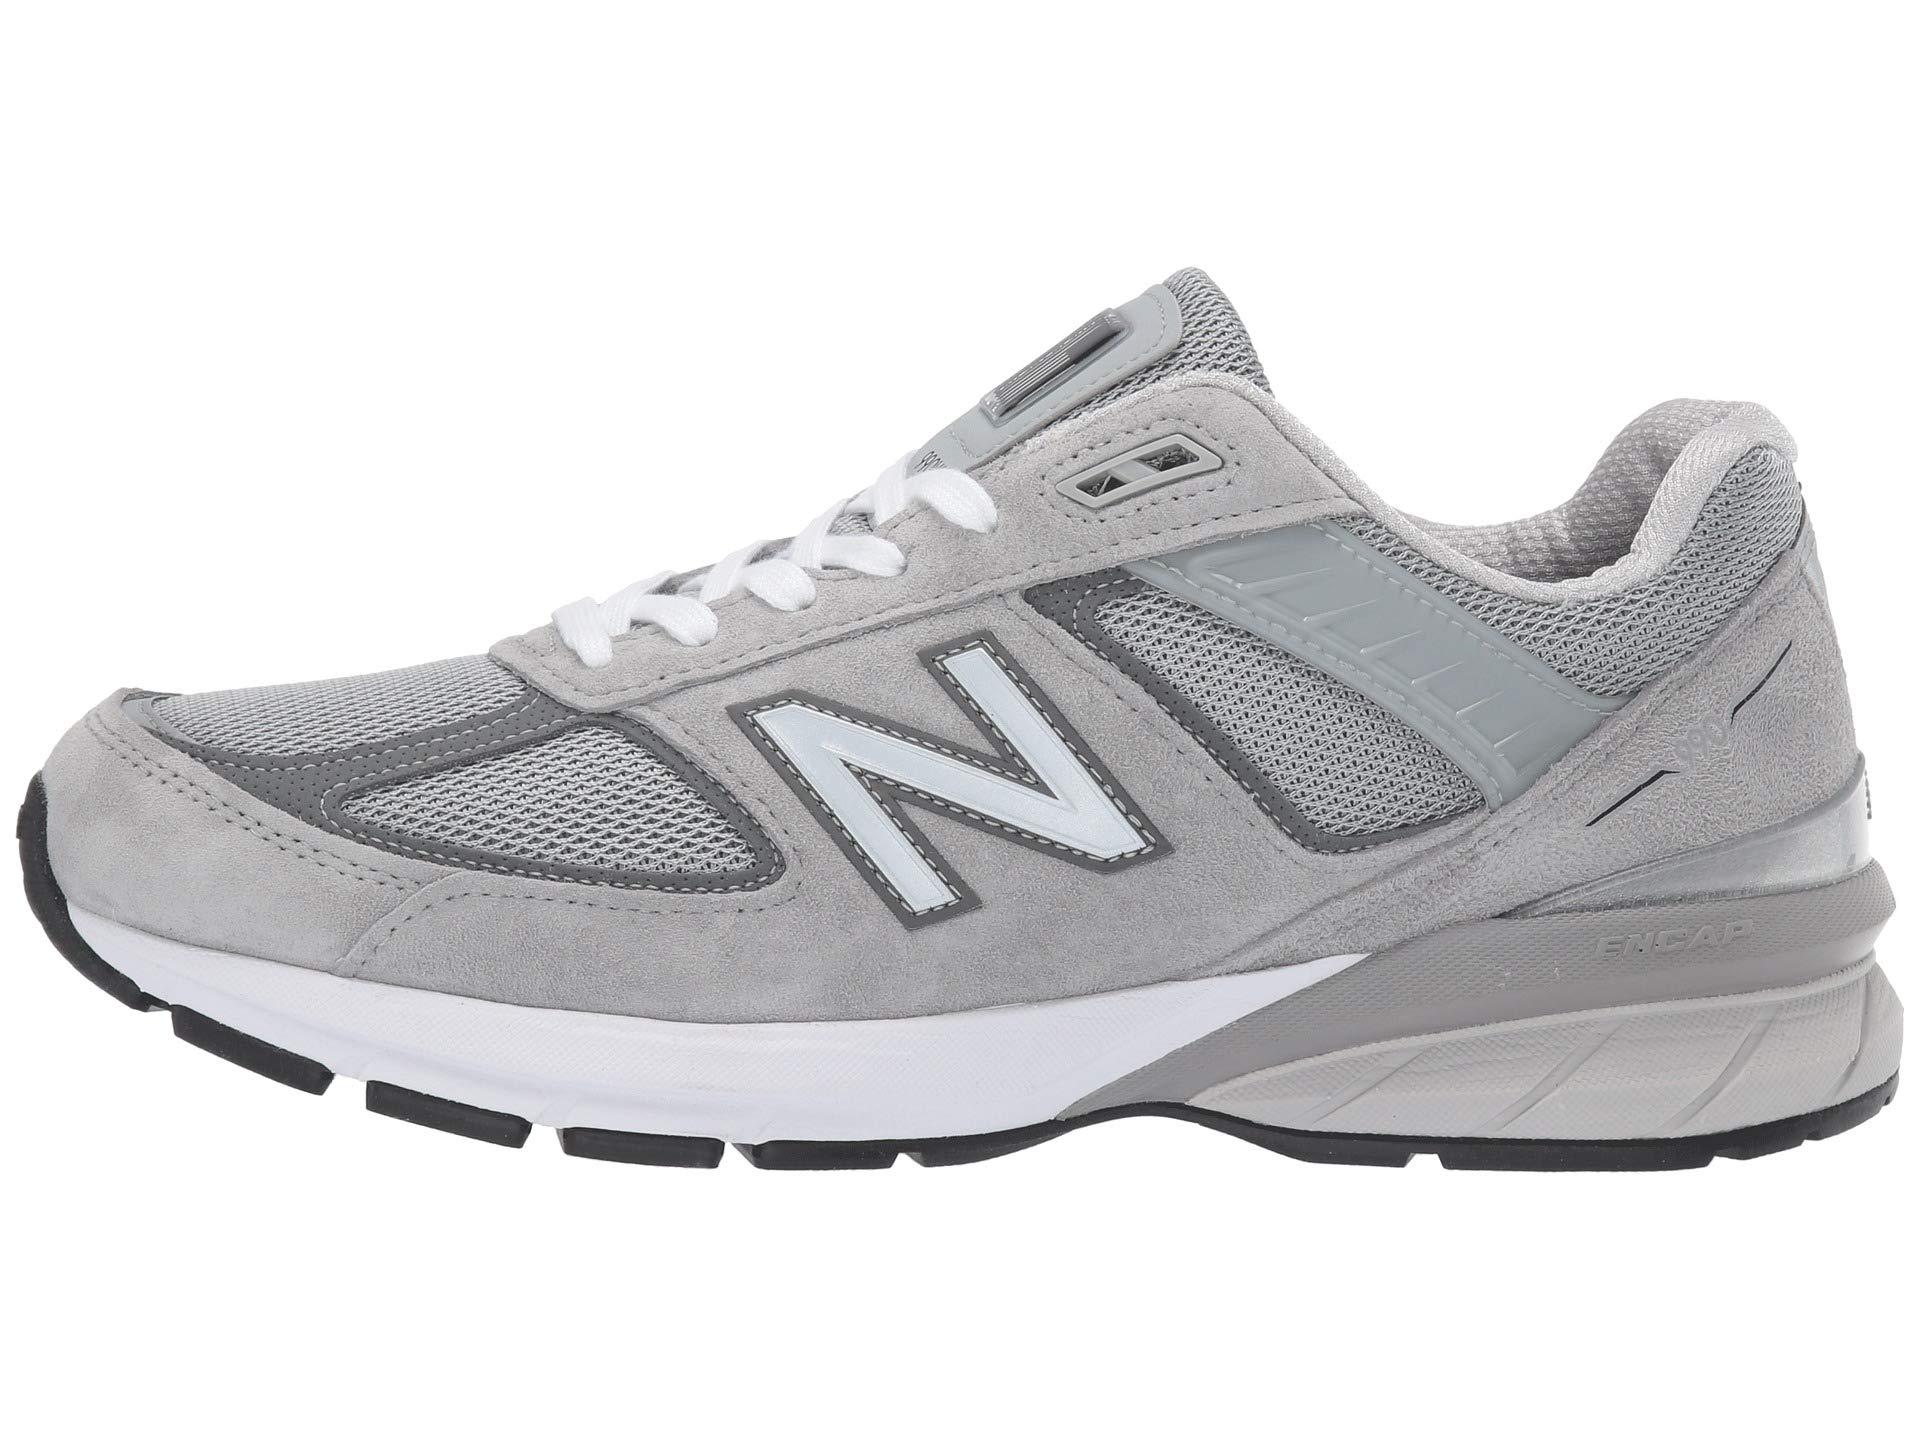 New Balance 990v5 (black/silver) Men's Classic Shoes in Gray for Men - Lyst